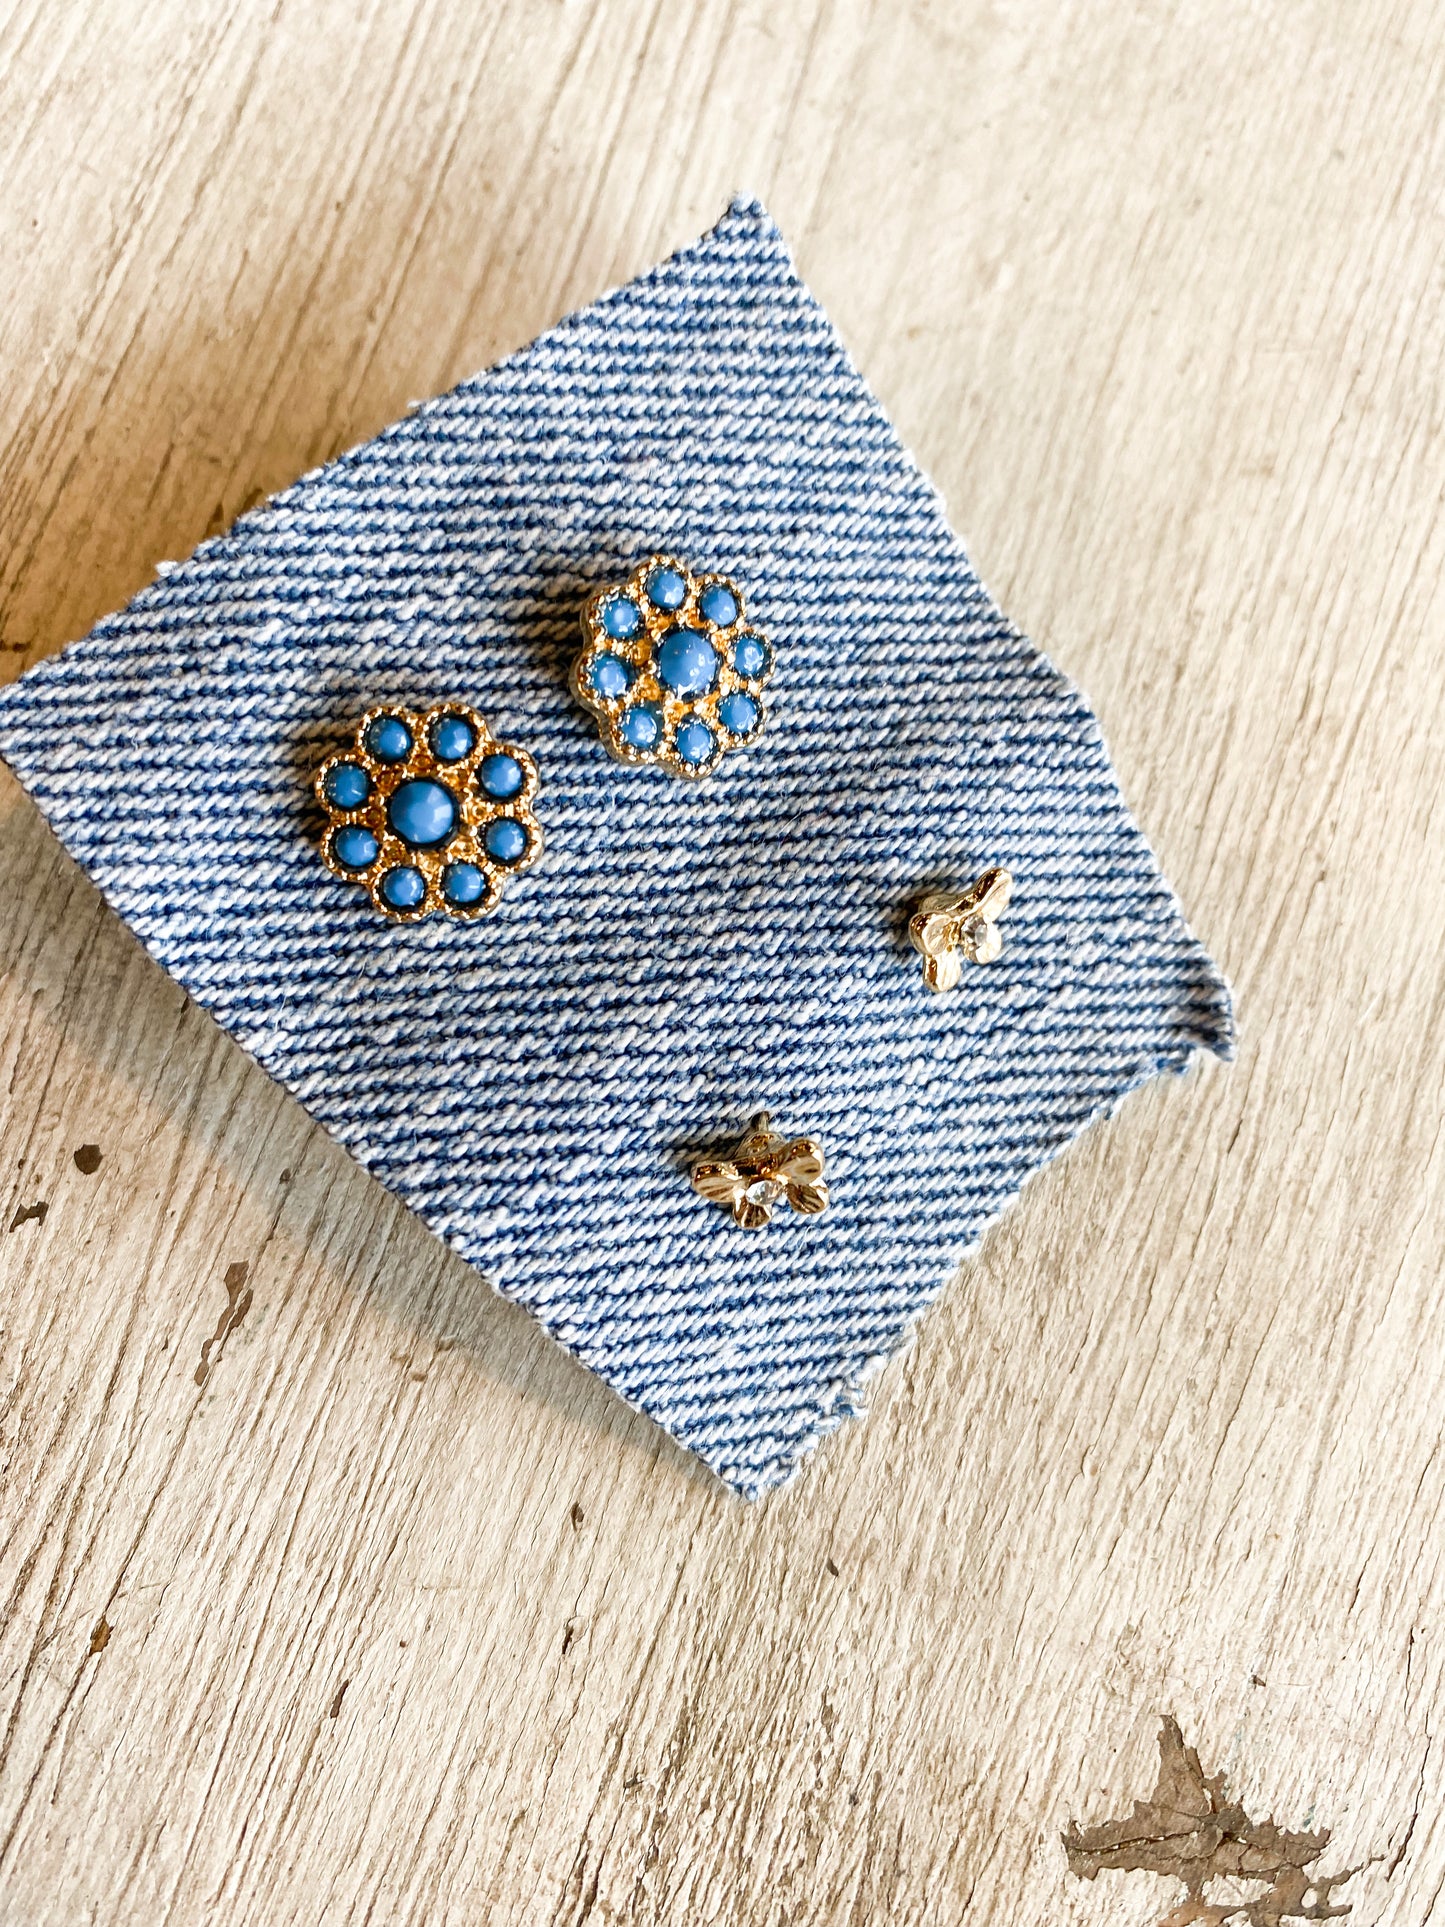 Blue daisy and butterfly gold earring stud set